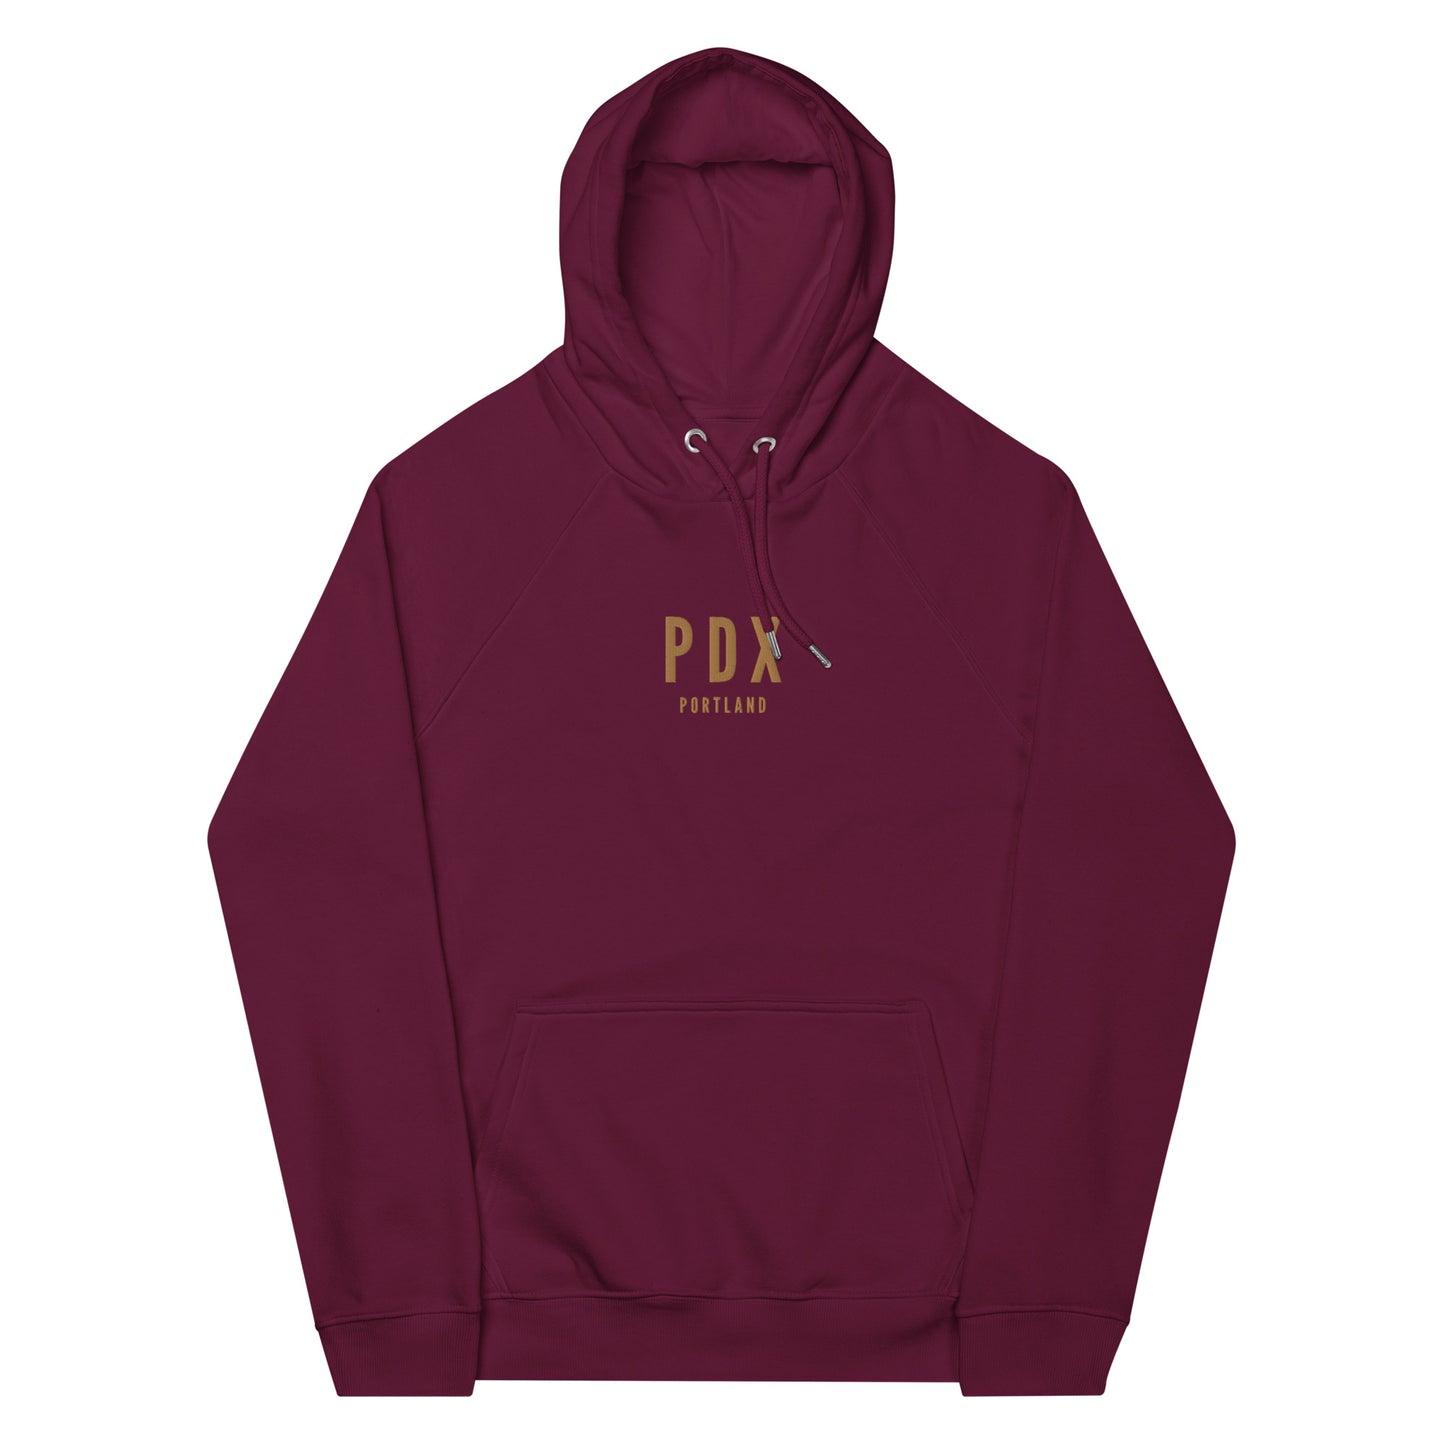 City Organic Hoodie - Old Gold • PDX Portland • YHM Designs - Image 11